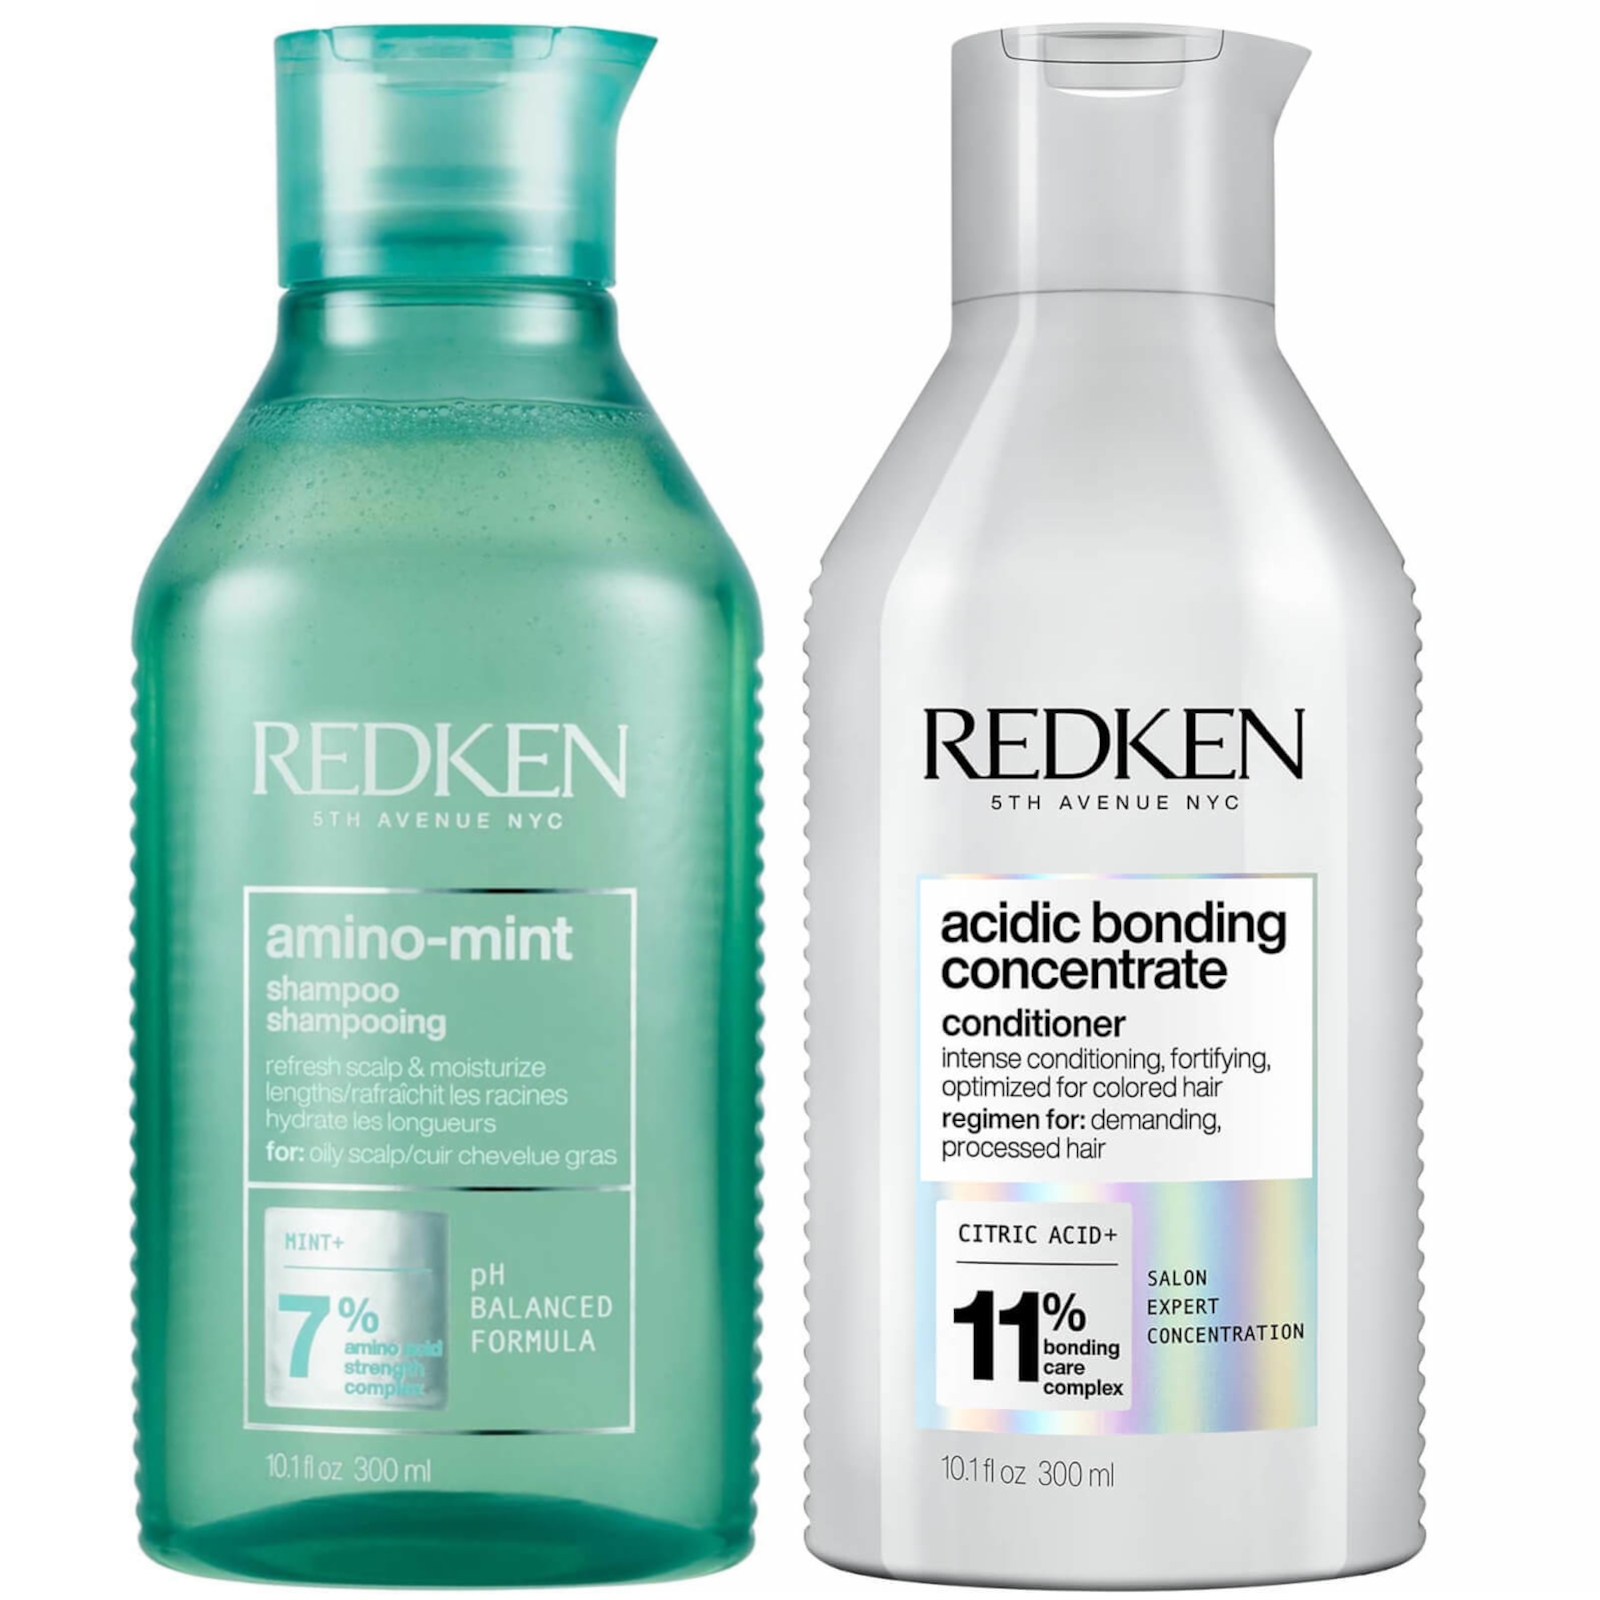 Redken Amino Mint Scalp Cleansing for Greasy Hair Shampoo and Acidic Bonding Concentrate Conditioner